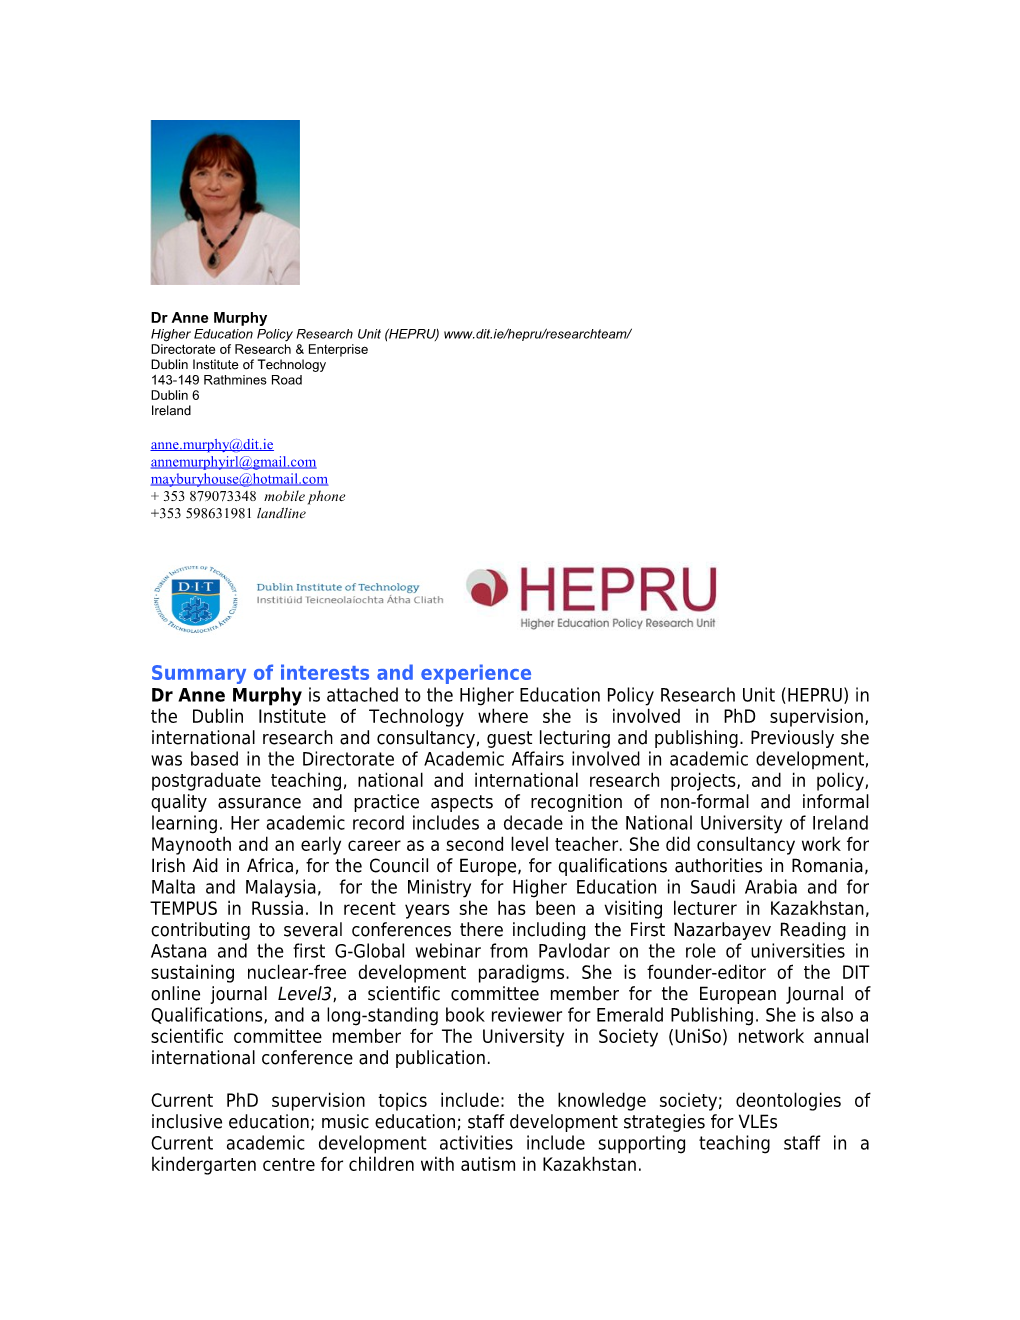 Higher Education Policy Research Unit (HEPRU)